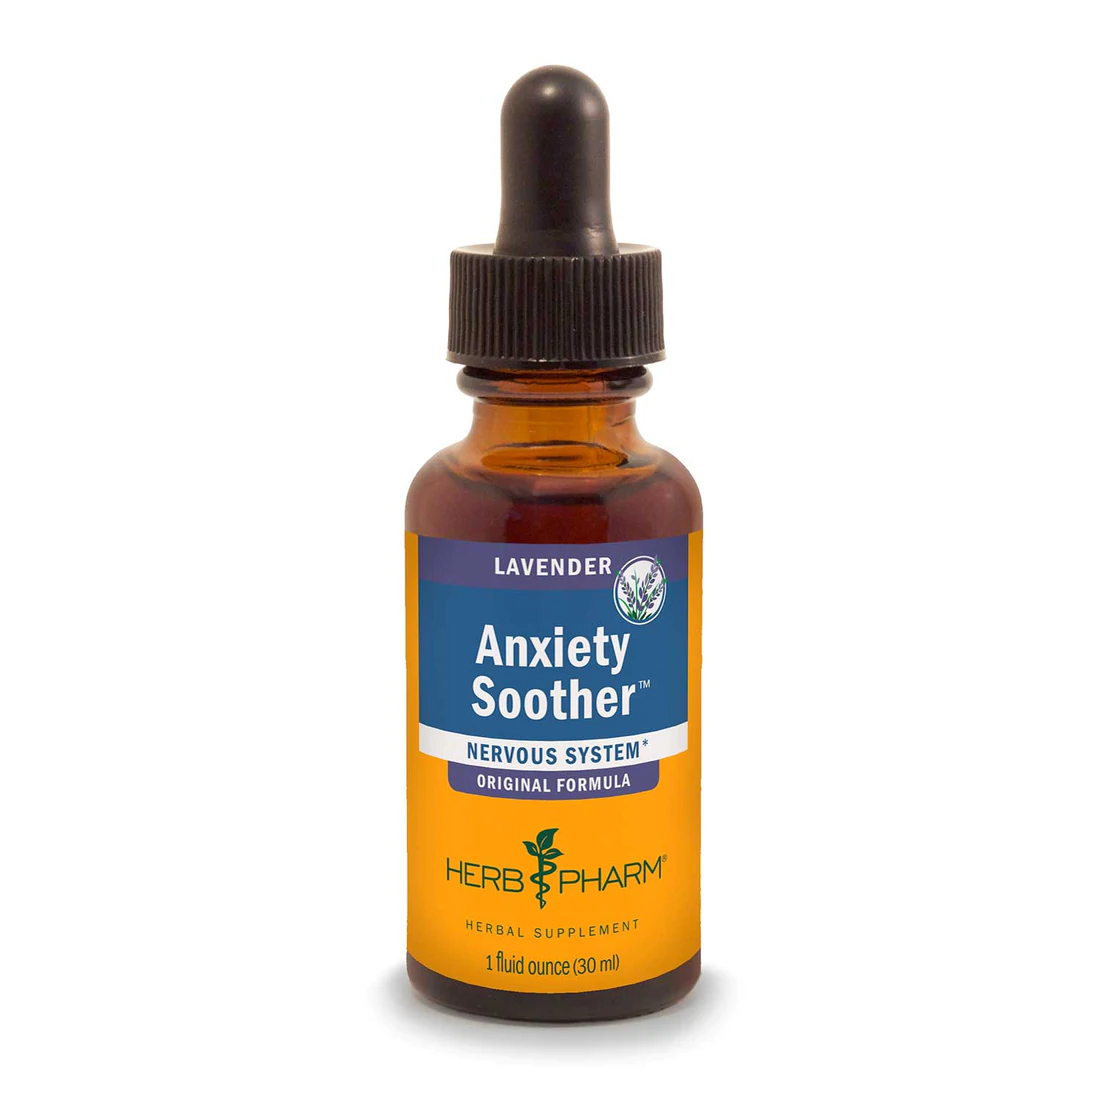 Anxiety Soother "Lavender" 1oz